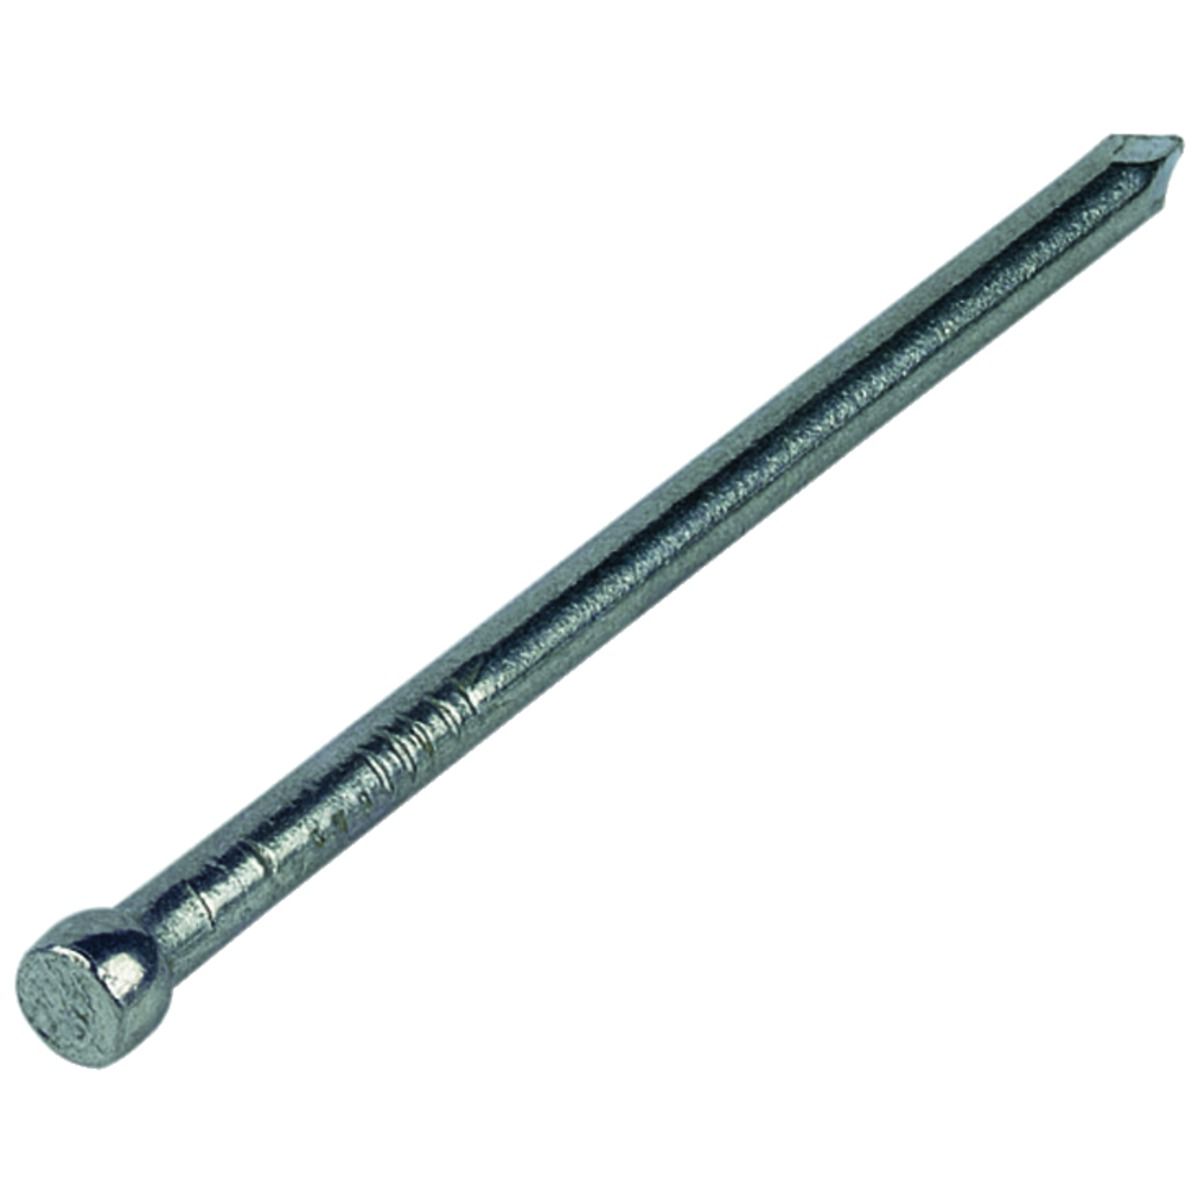 Image of Wickes 50mm Bright Lost Head Nails - 2kg